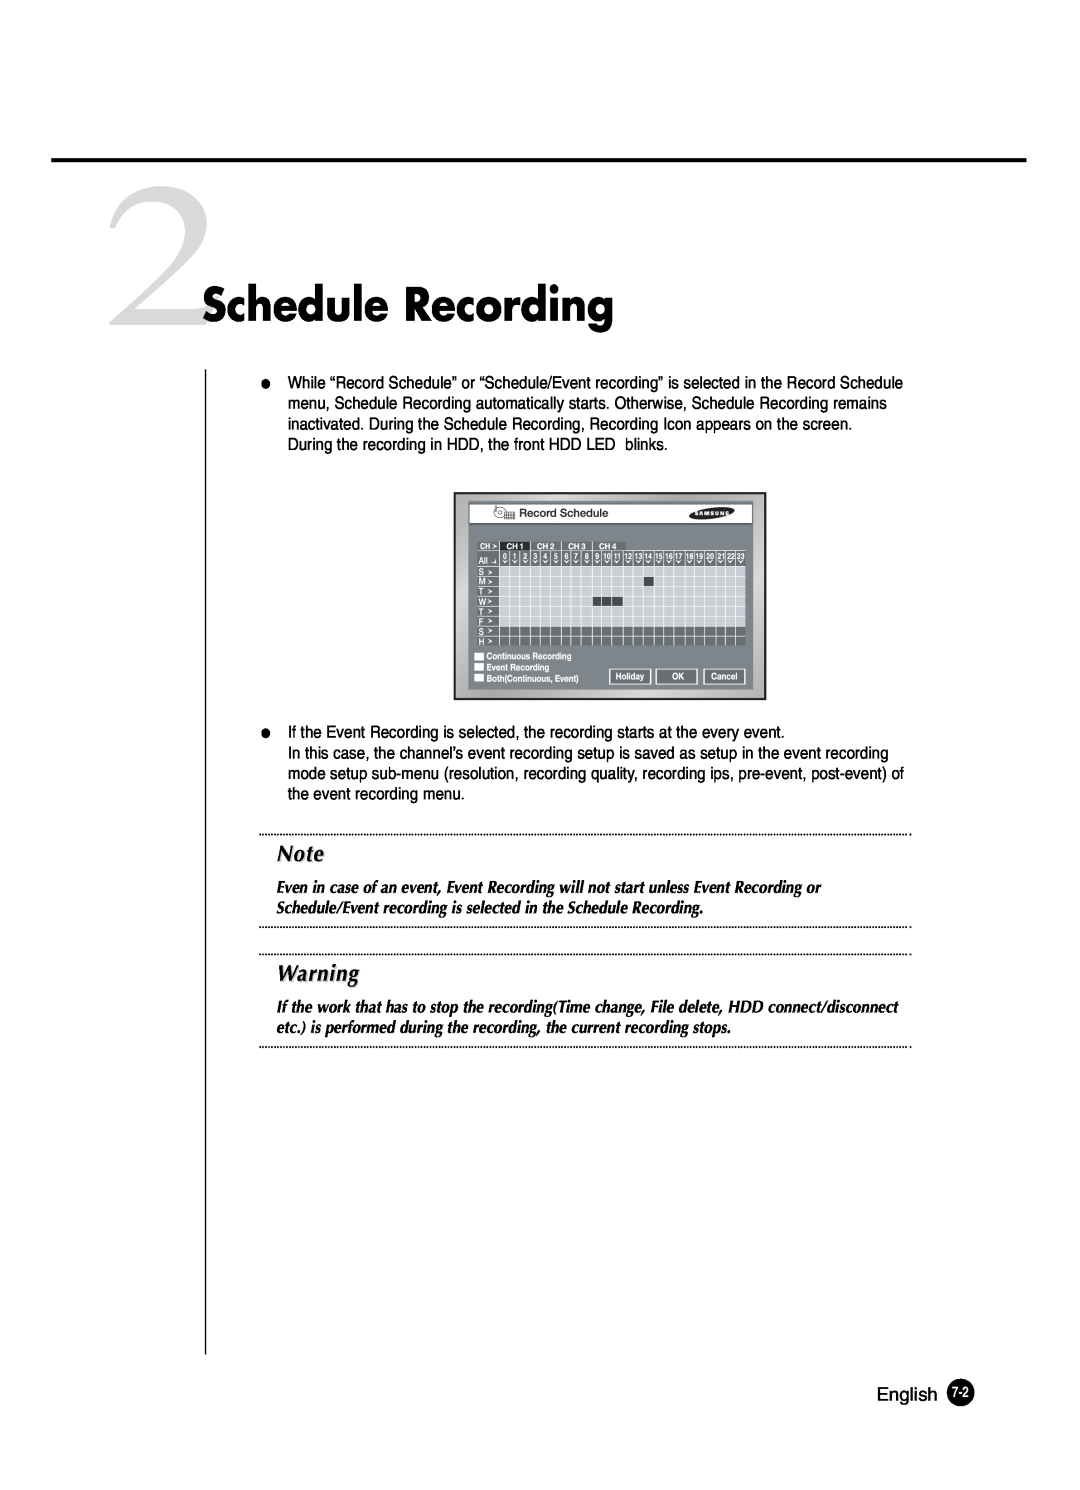 Samsung SHR-2042P250, SHR-2040P250 2Schedule Recording, Schedule/Event recording is selected in the Schedule Recording 